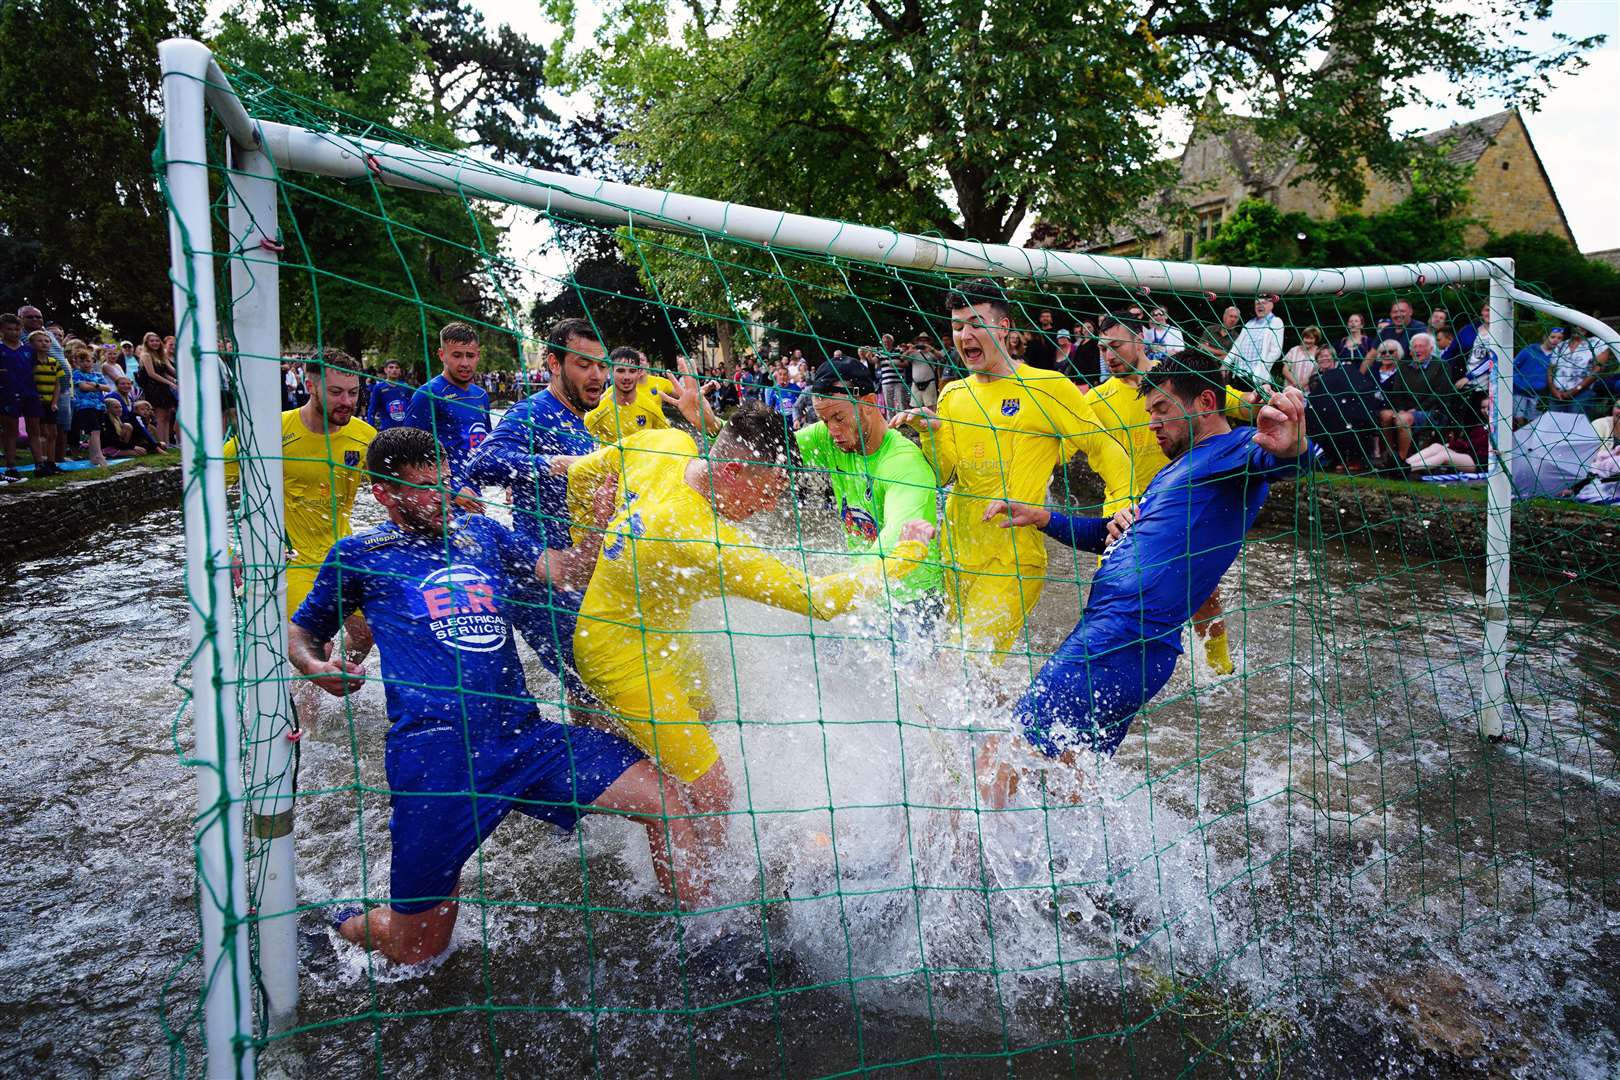 Footballers from Bourton Rovers go in deep as they fight for the ball (Ben Birchall/PA)